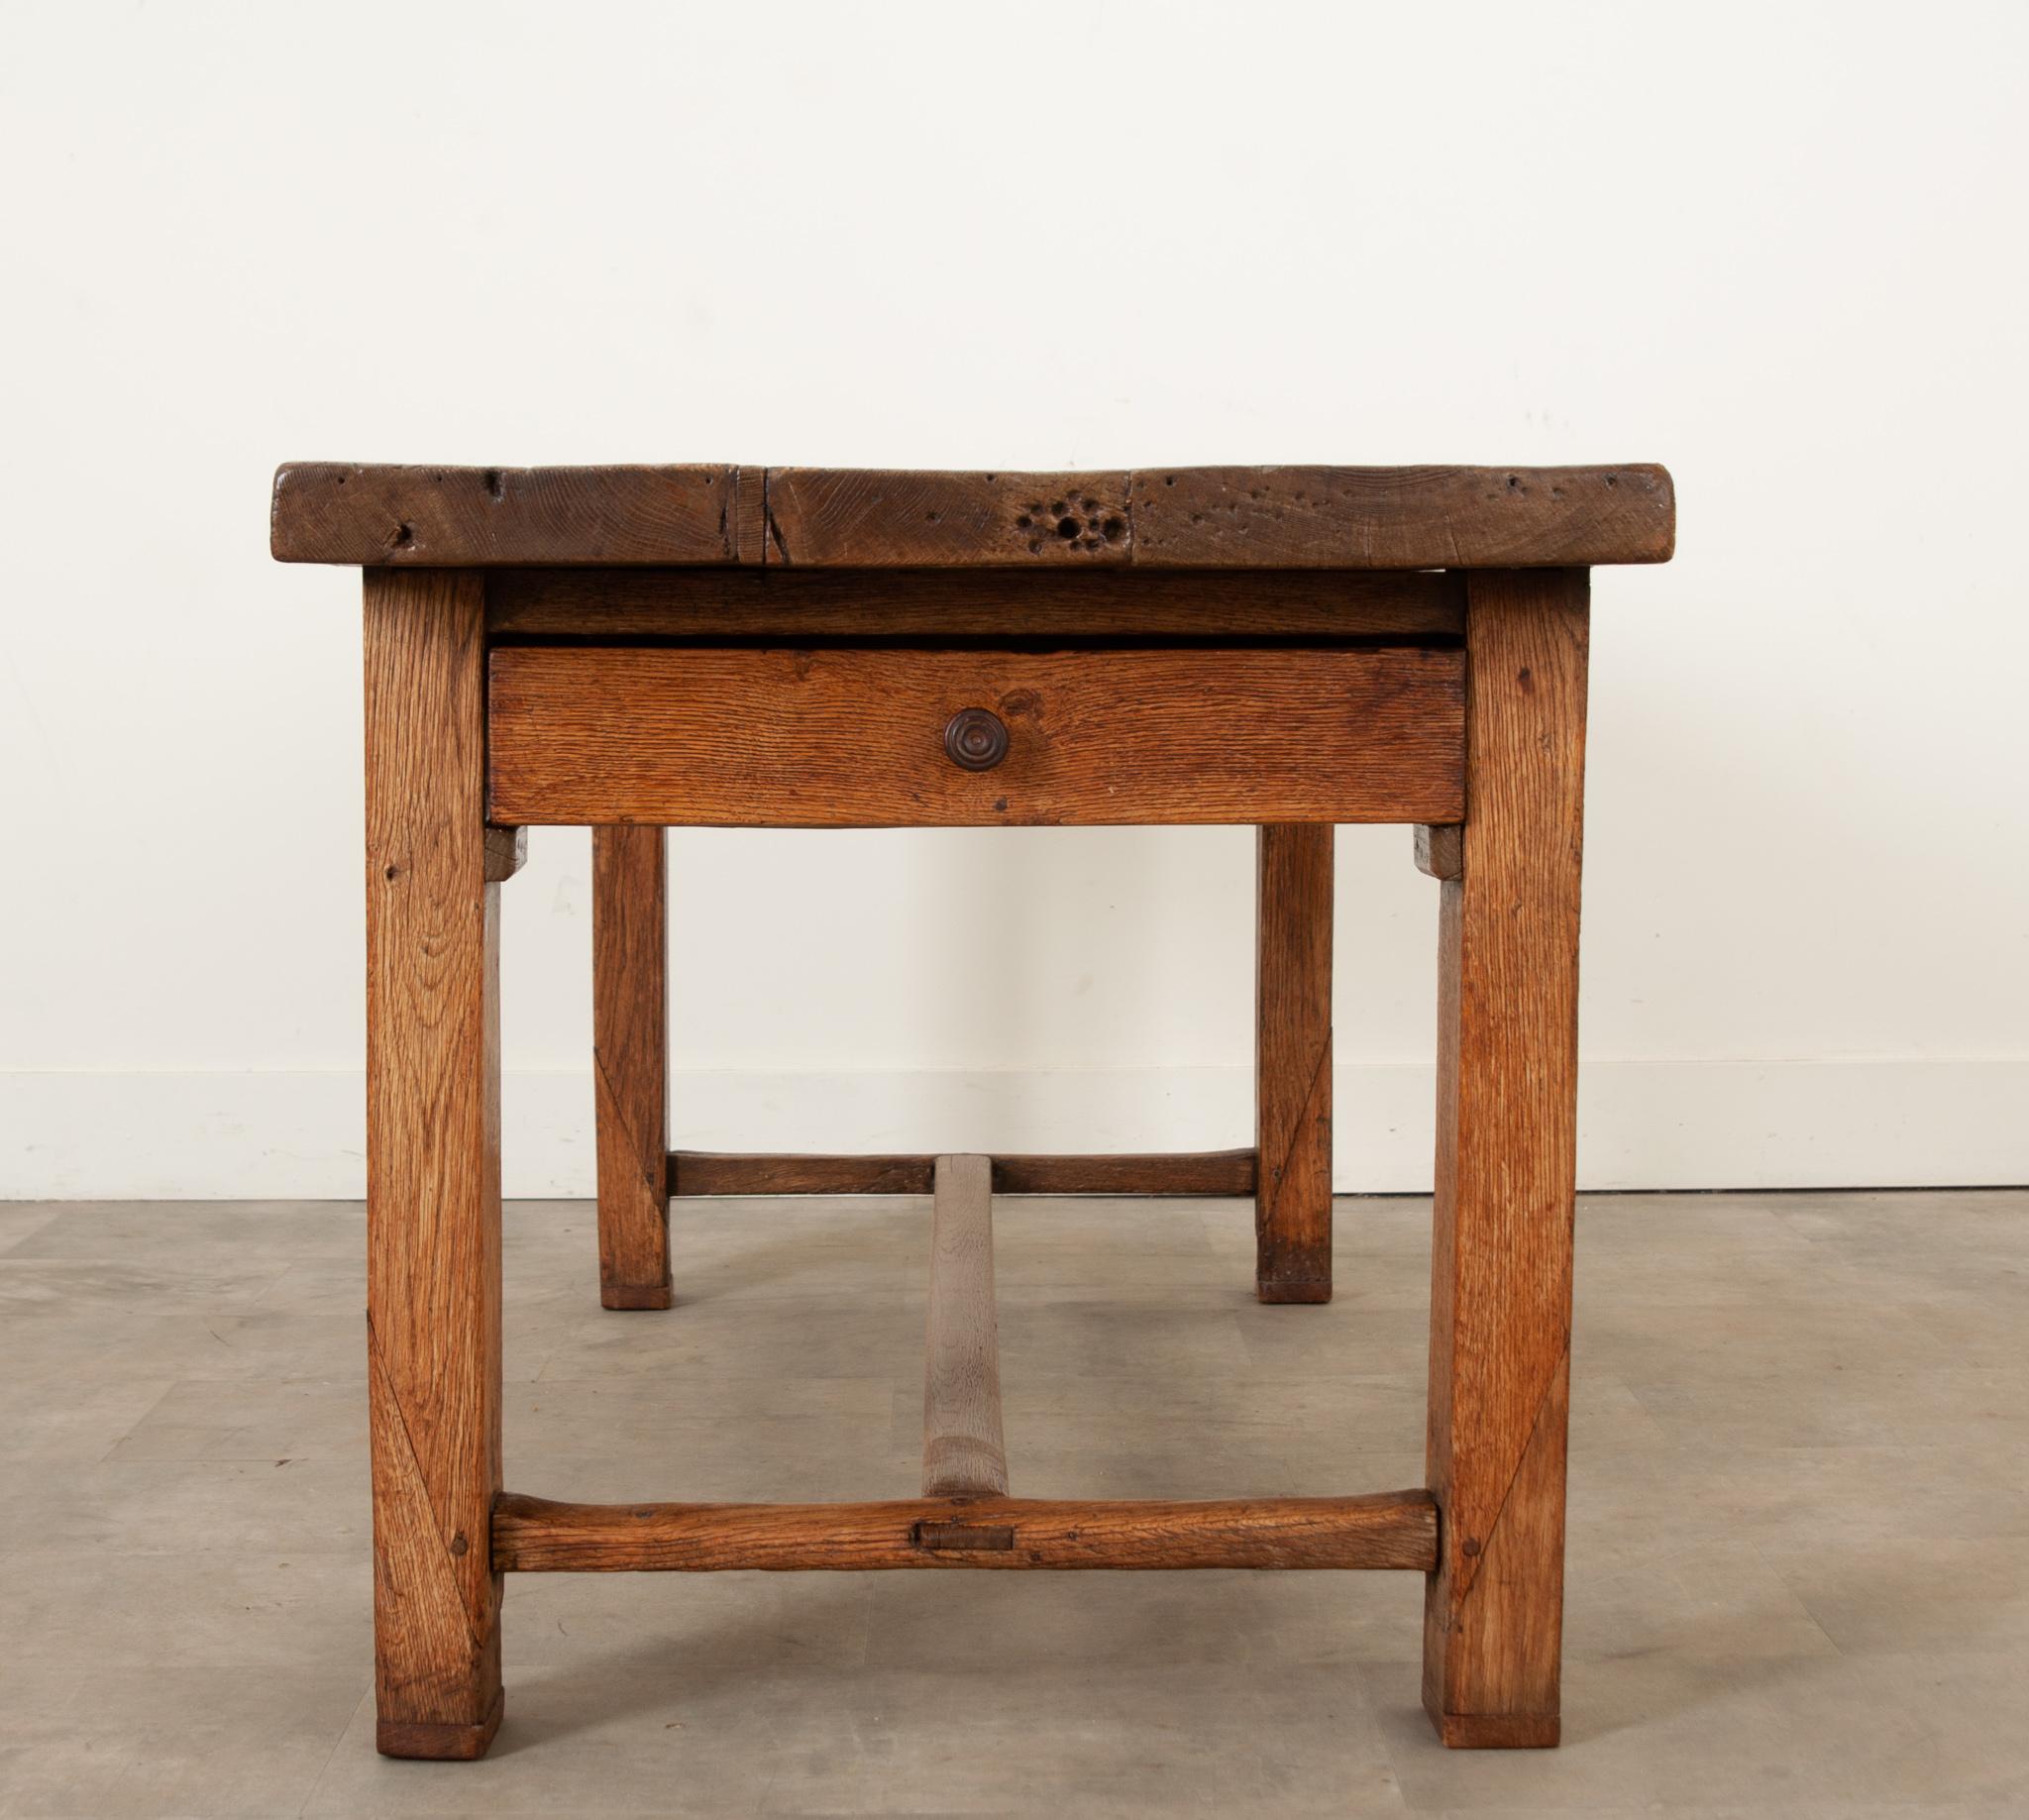 This primitive solid oak farmhouse table is sound and sturdy with a handsome patina. The two board 2” thick top sits over study block legs connected with an apron and stretcher base. There are two long drawers found in the apron that pull from each